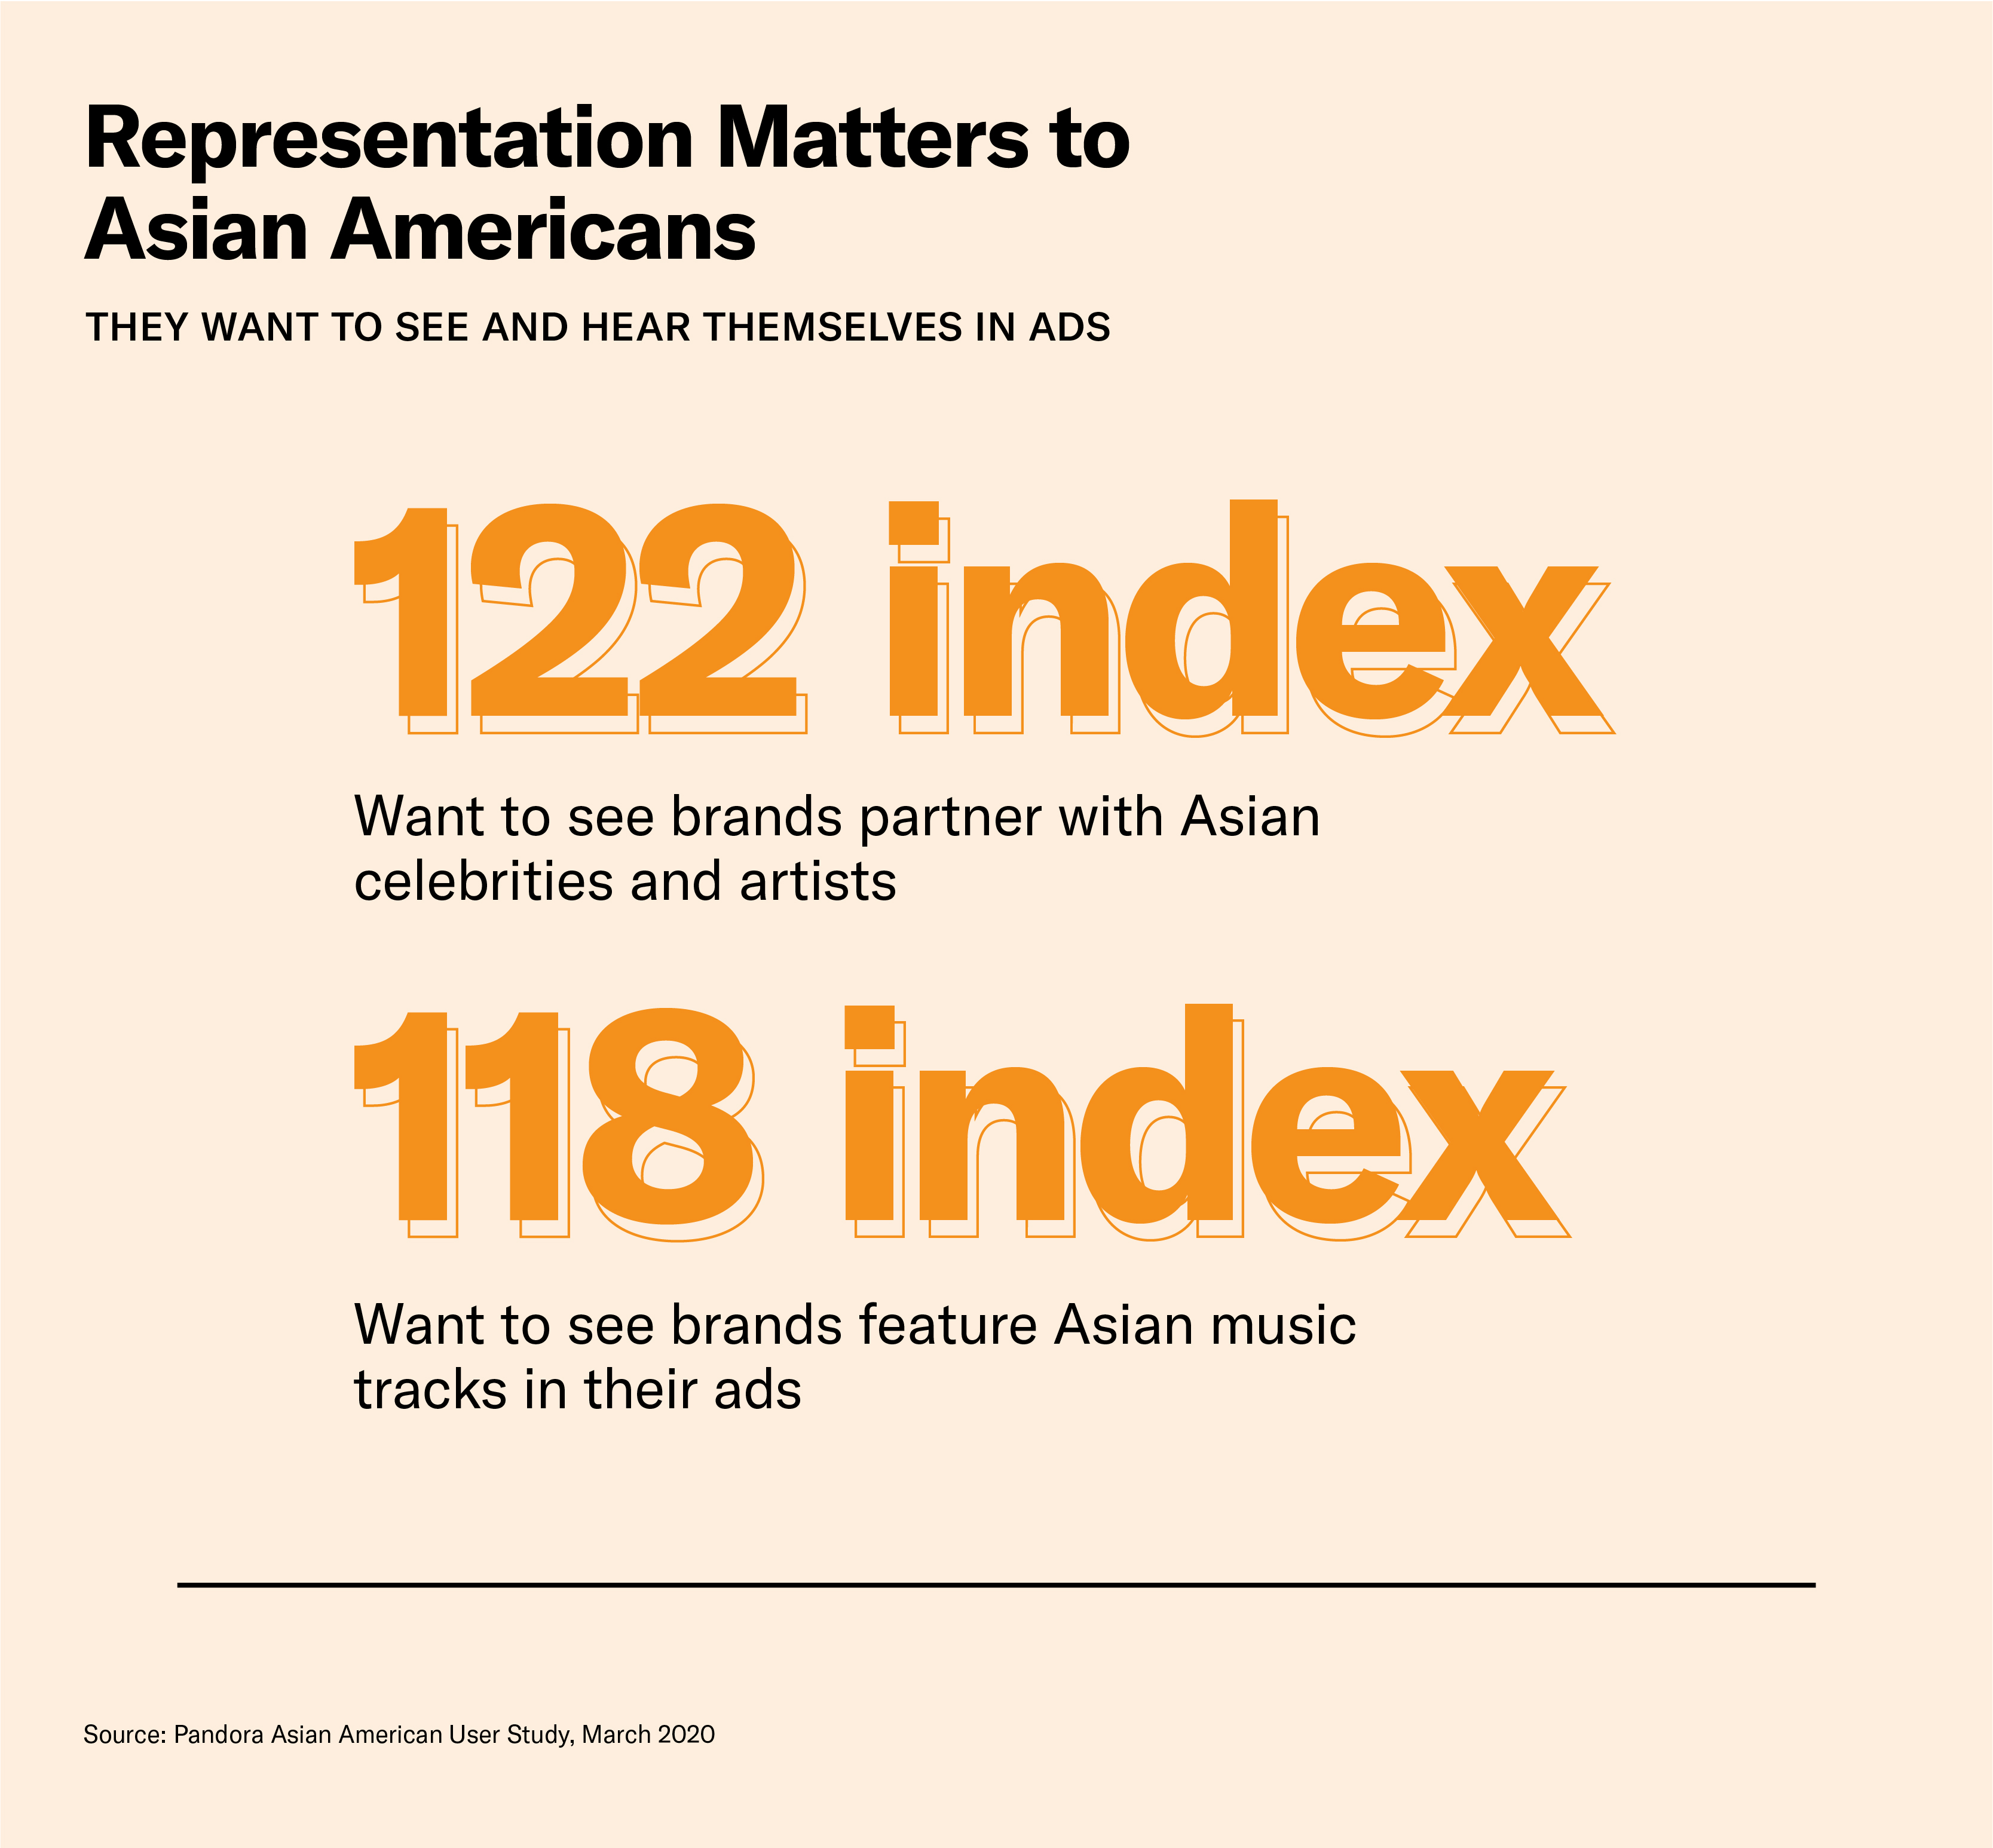 Representation matters to Asian Americans